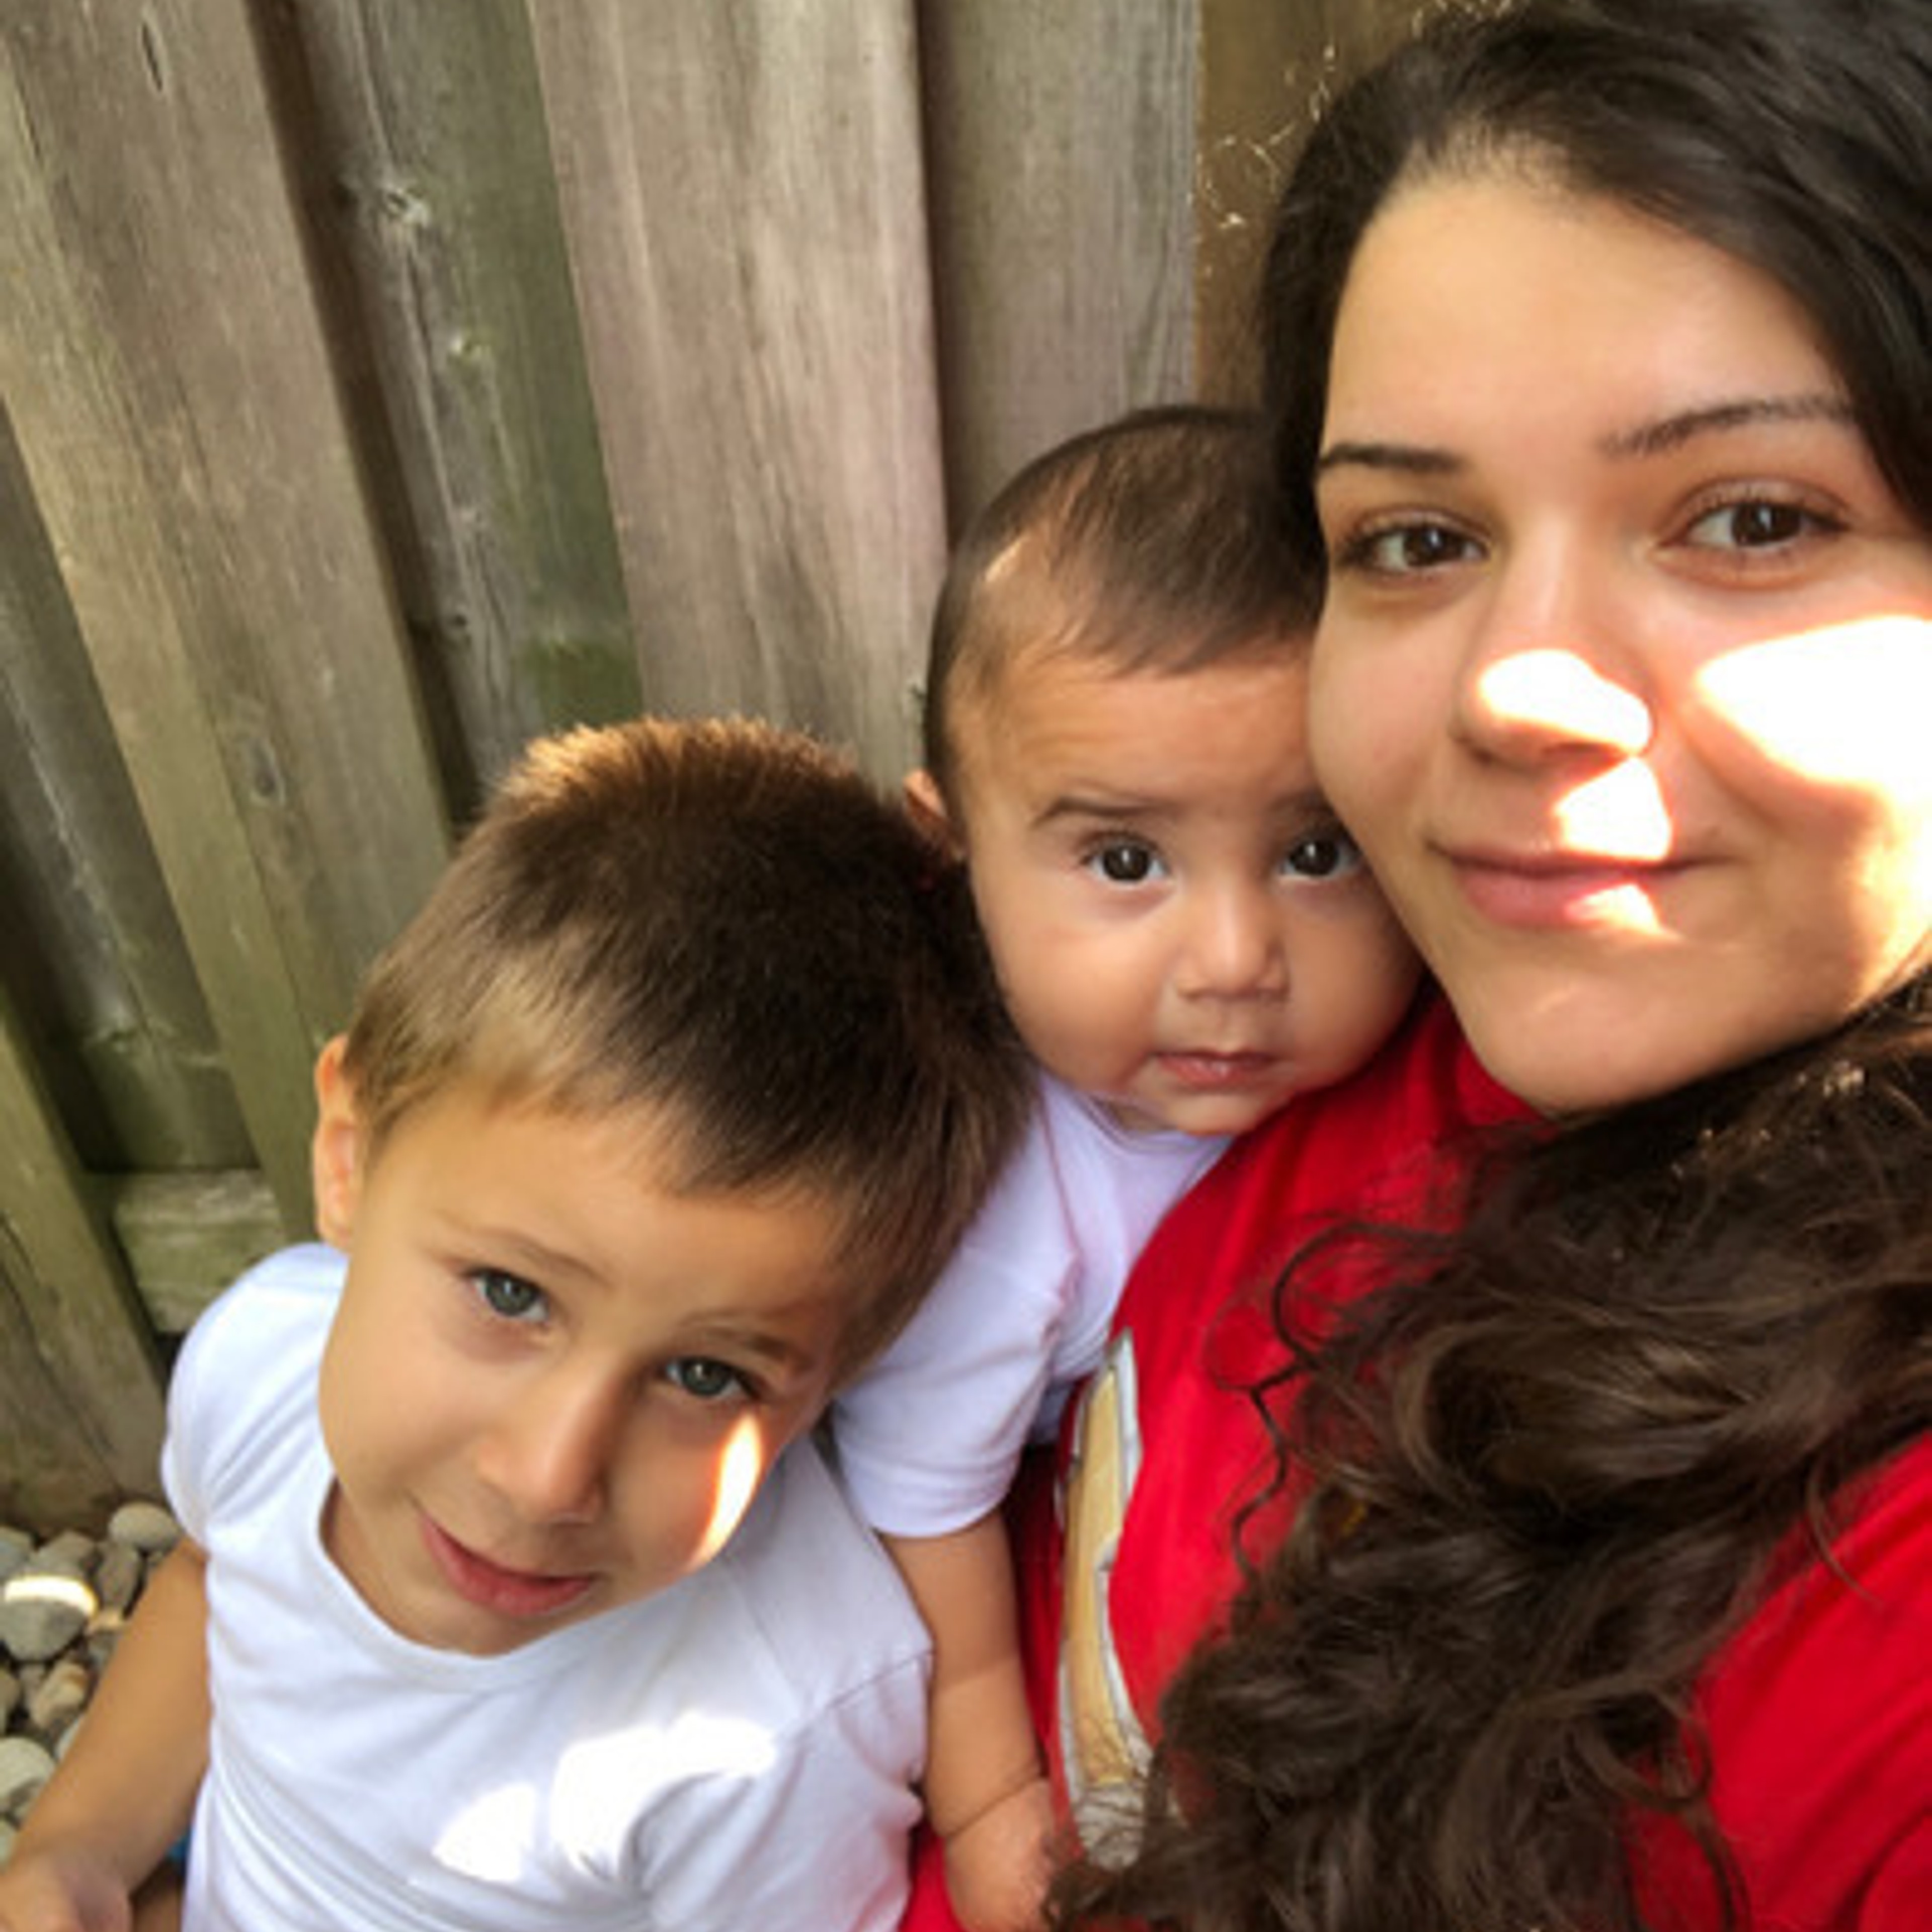 Experienced loving Nanny looking for nice family to care for